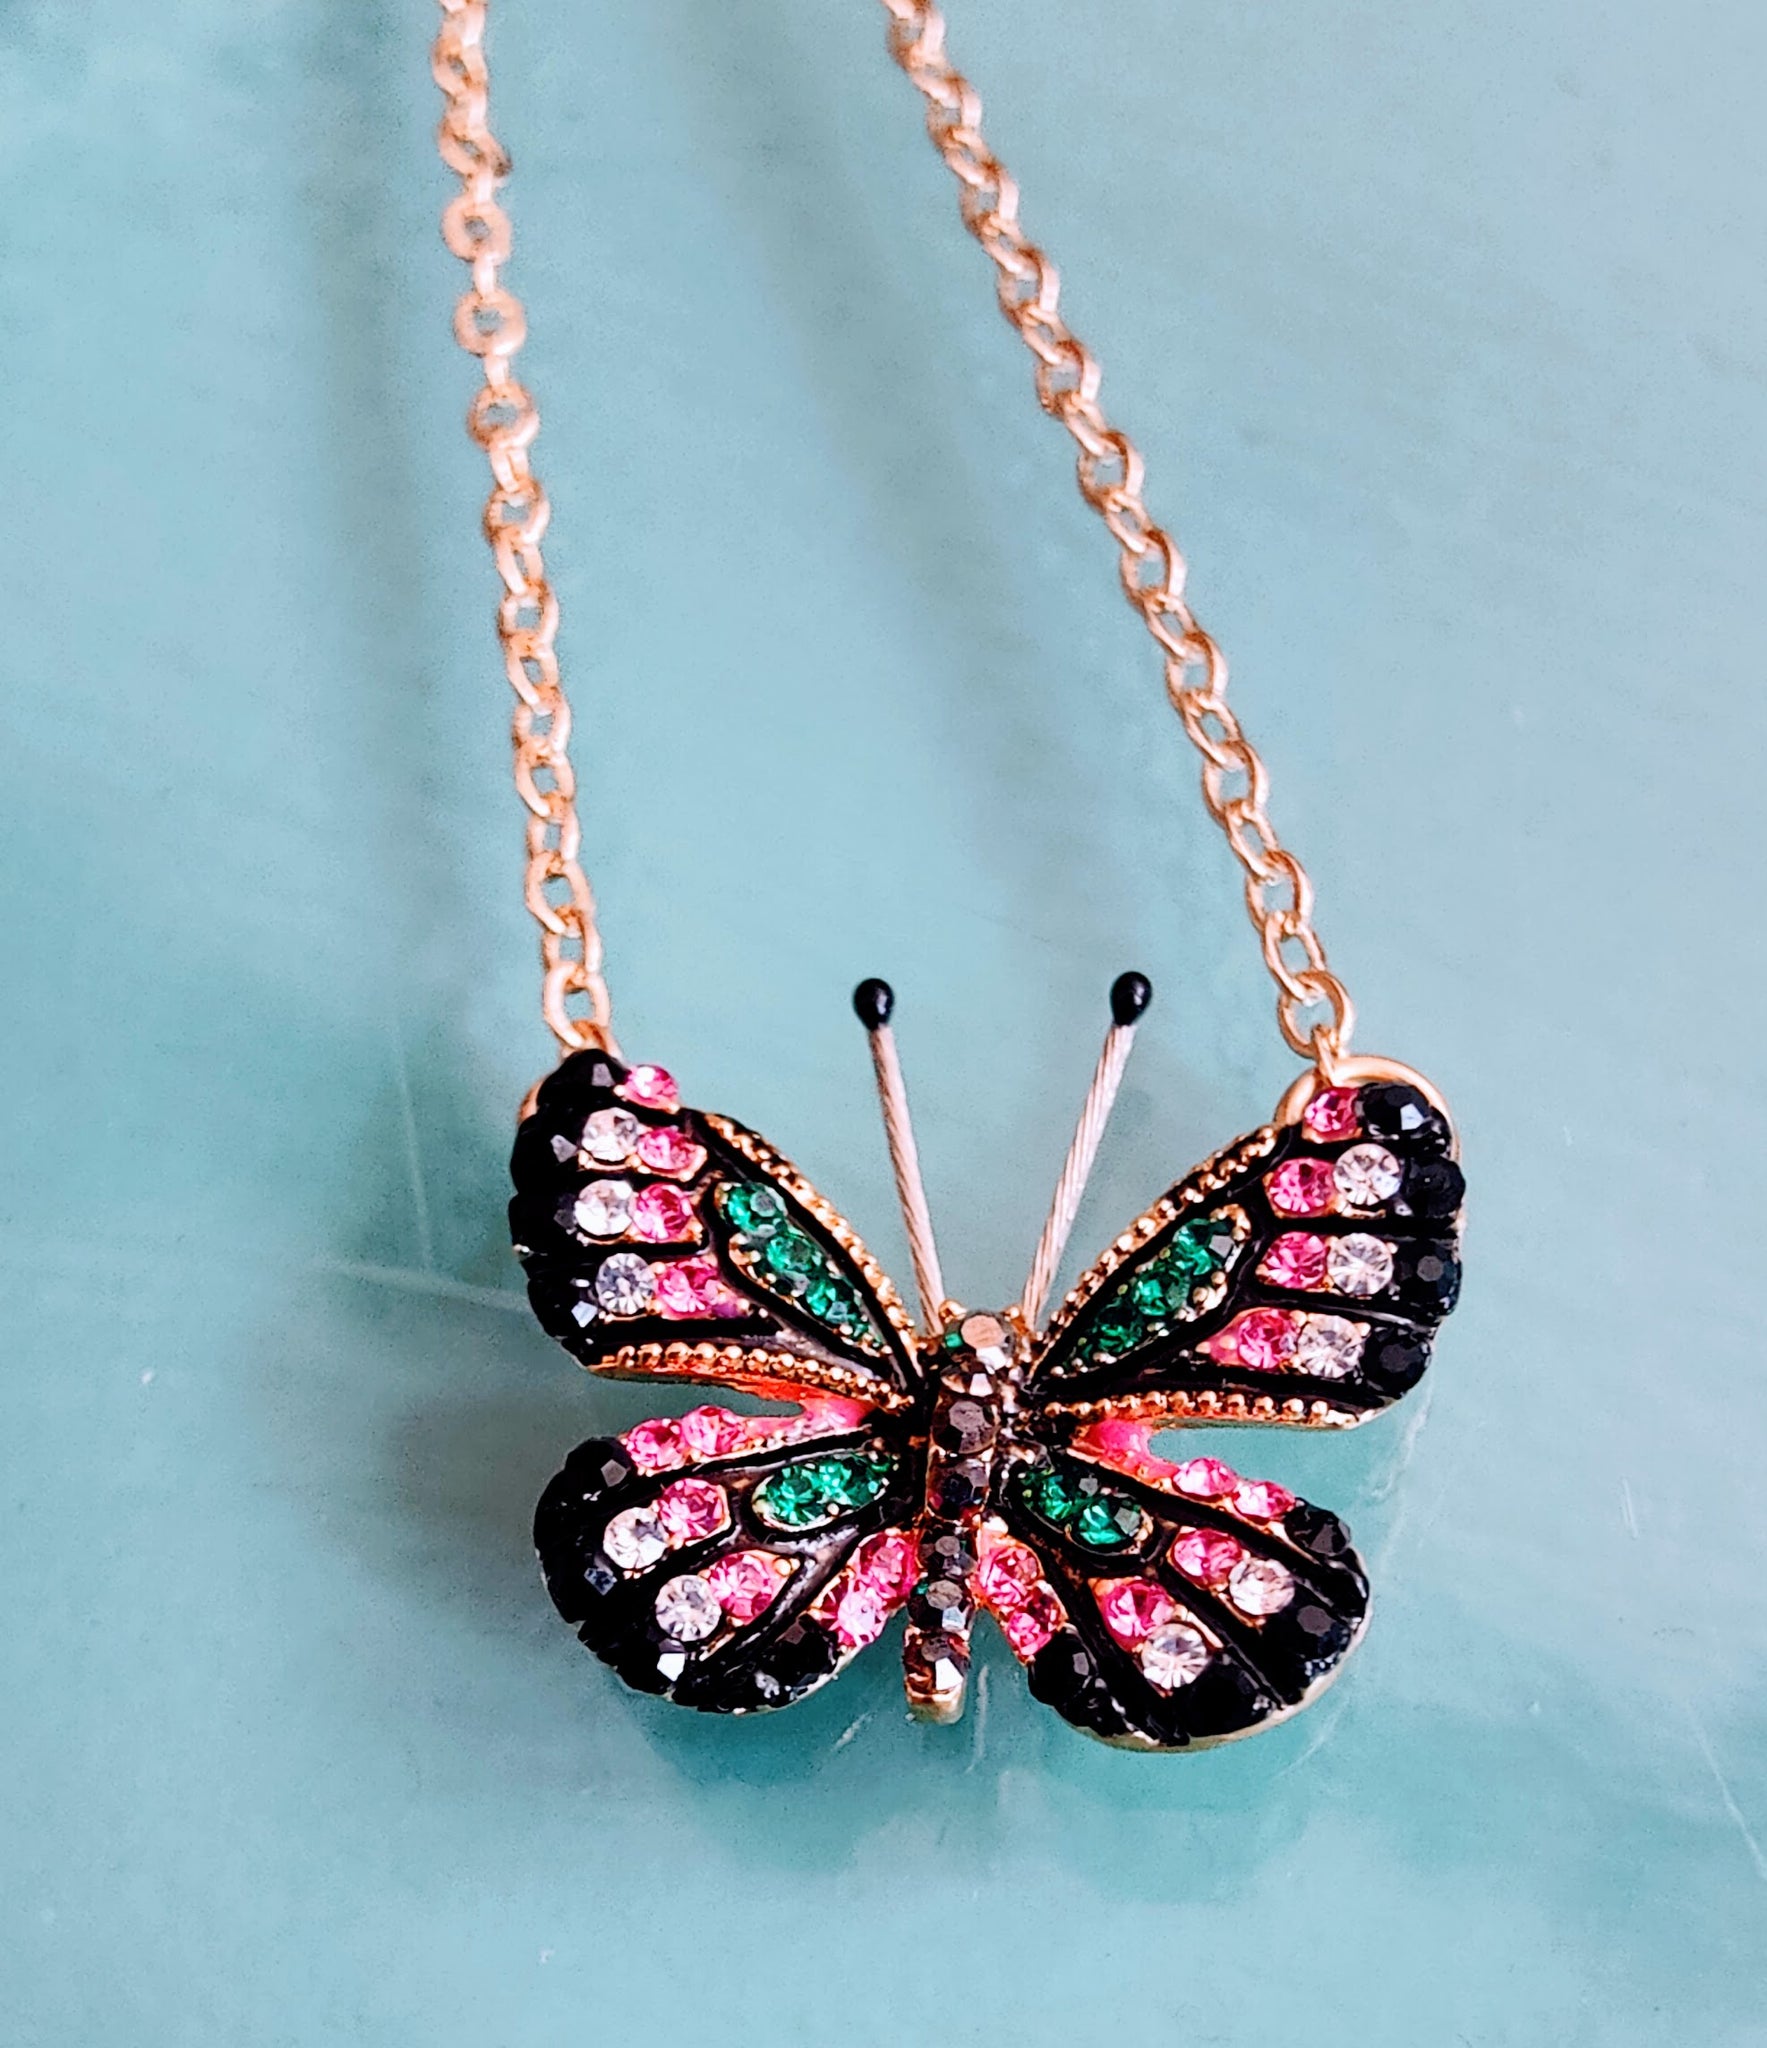 Multicolor Butterfly Necklace & Earring Set